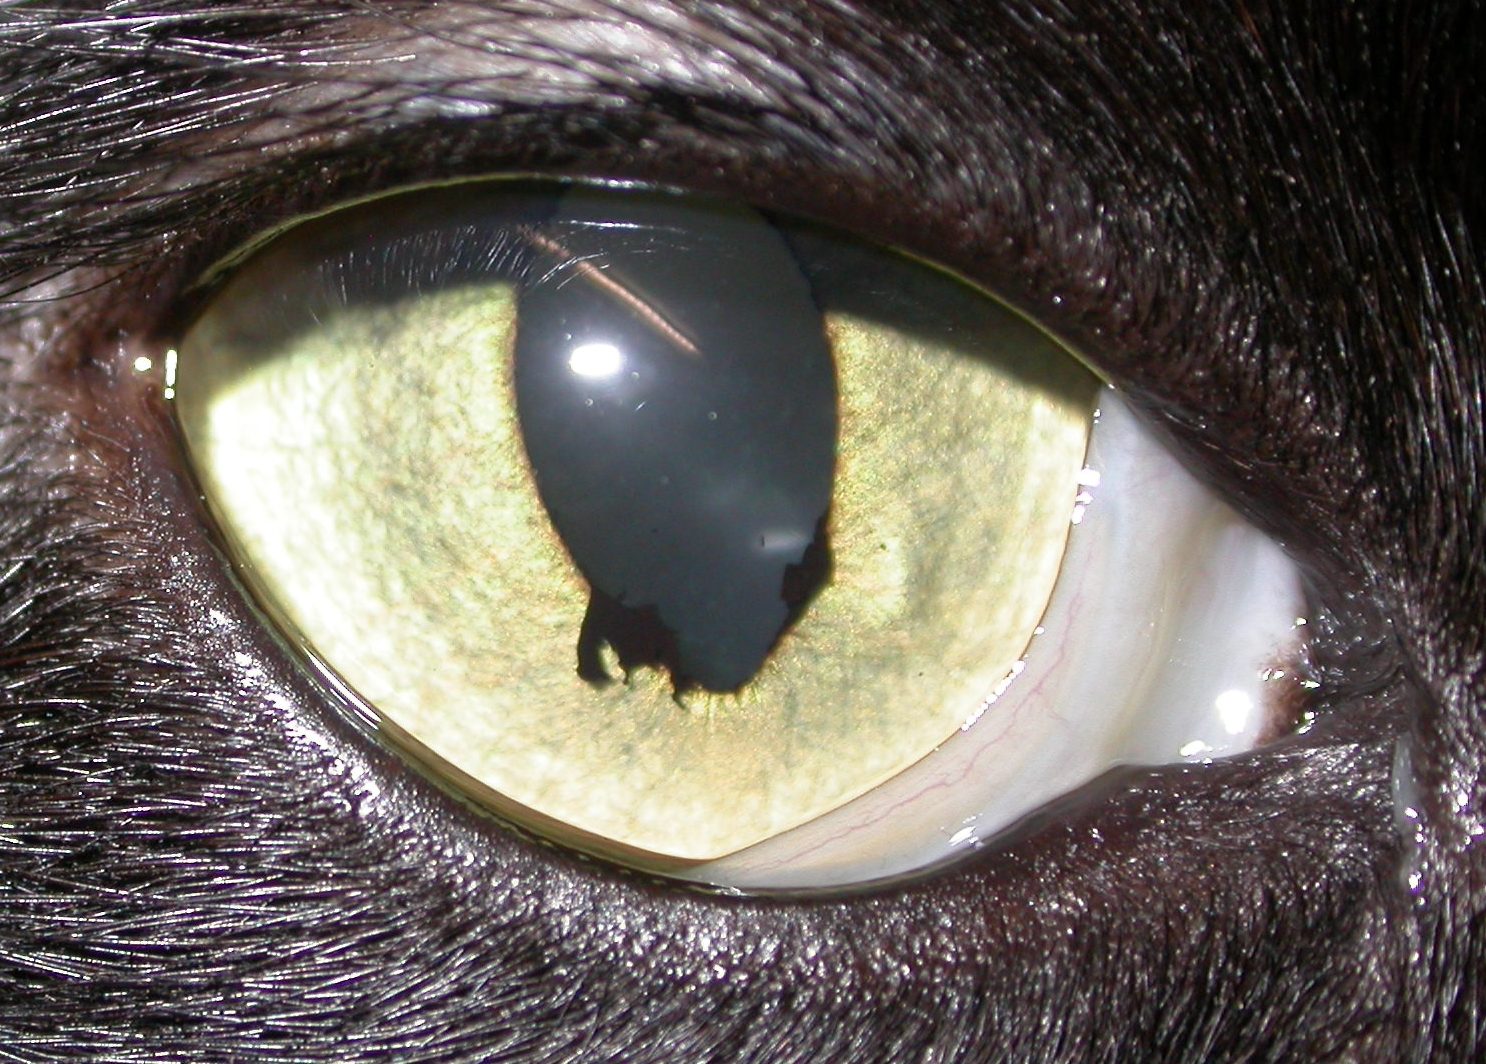 Is this a melanoma? Veterinary ophthalmology